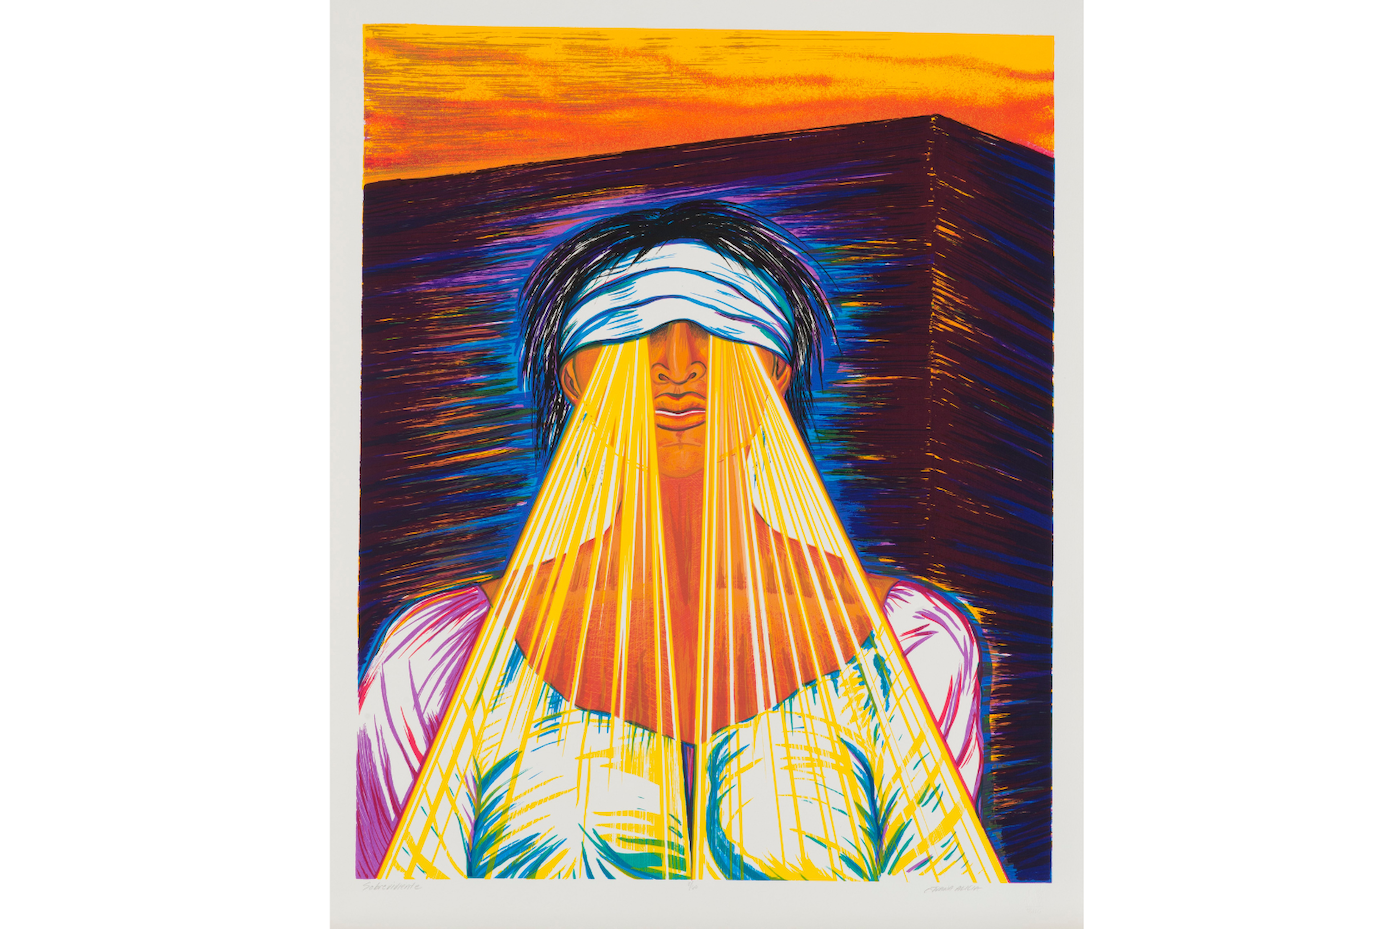 A blindfolded, medium dark-
skinned woman with rays of light
beaming out from where her eyes
are.